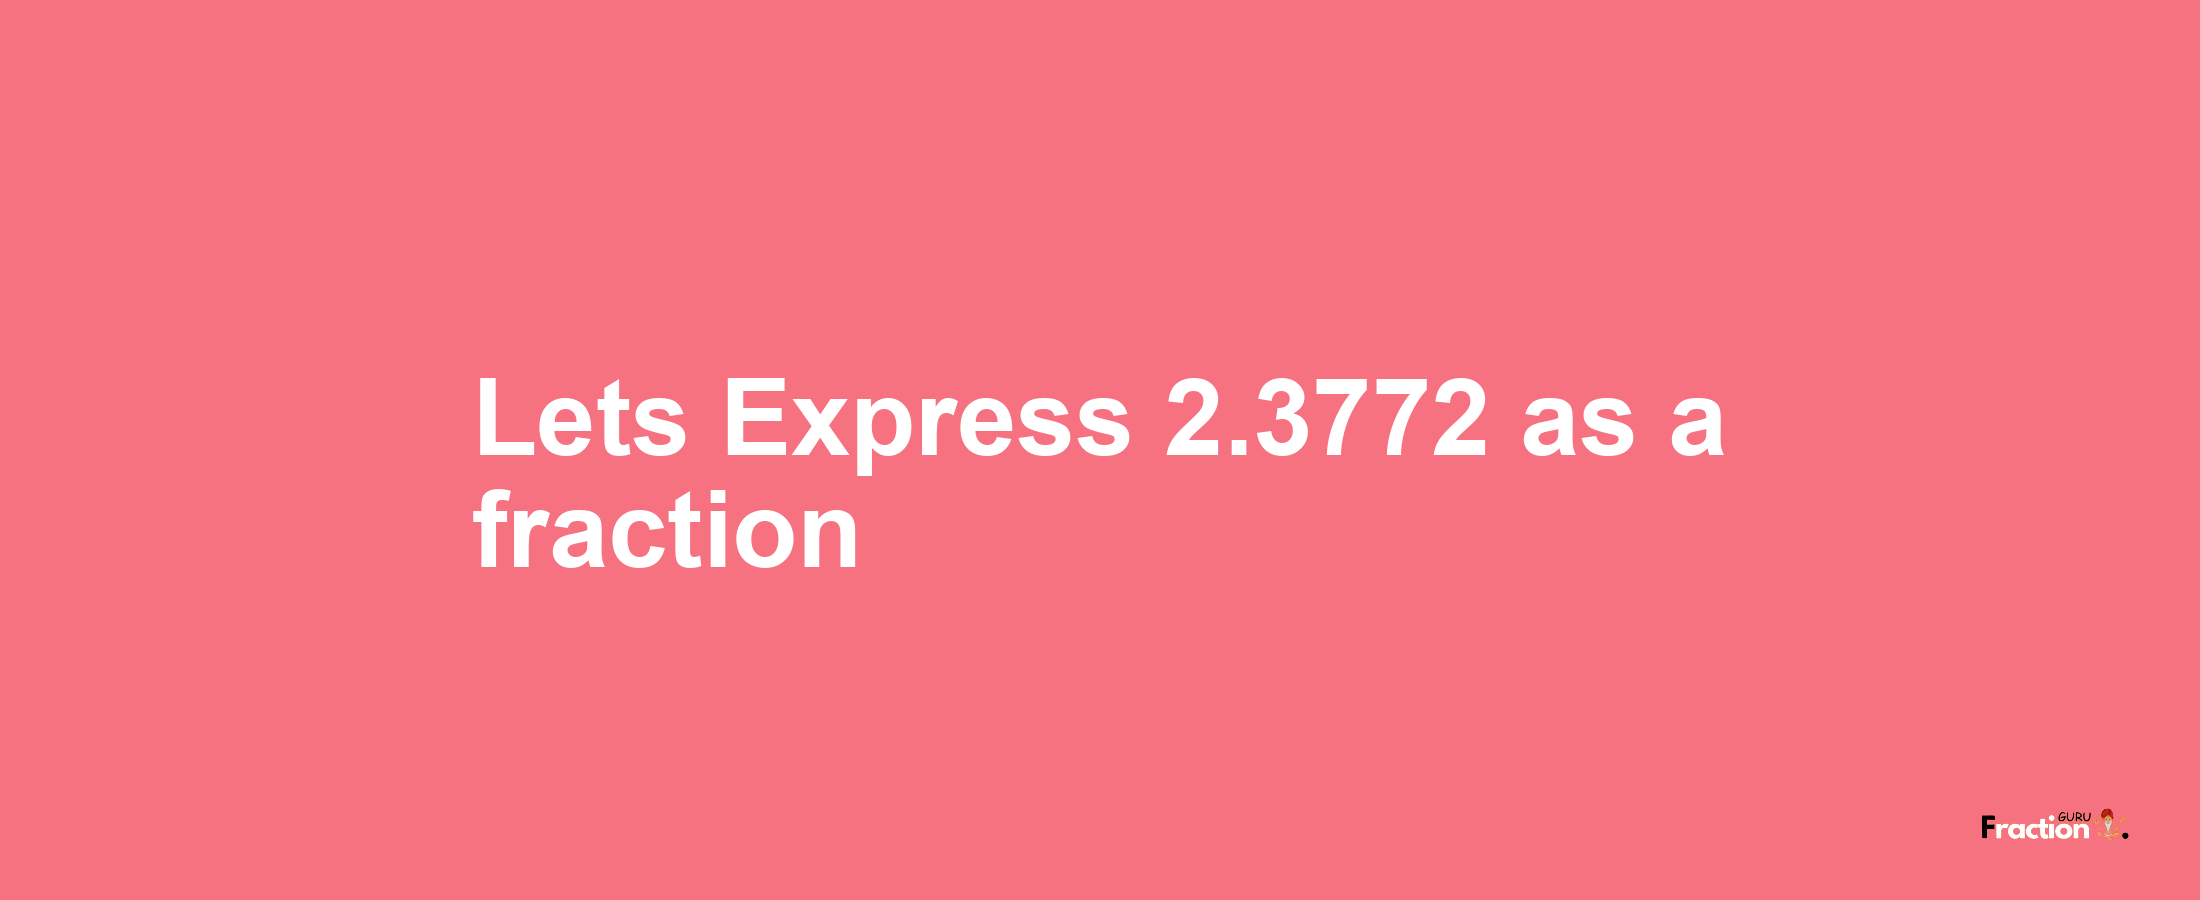 Lets Express 2.3772 as afraction